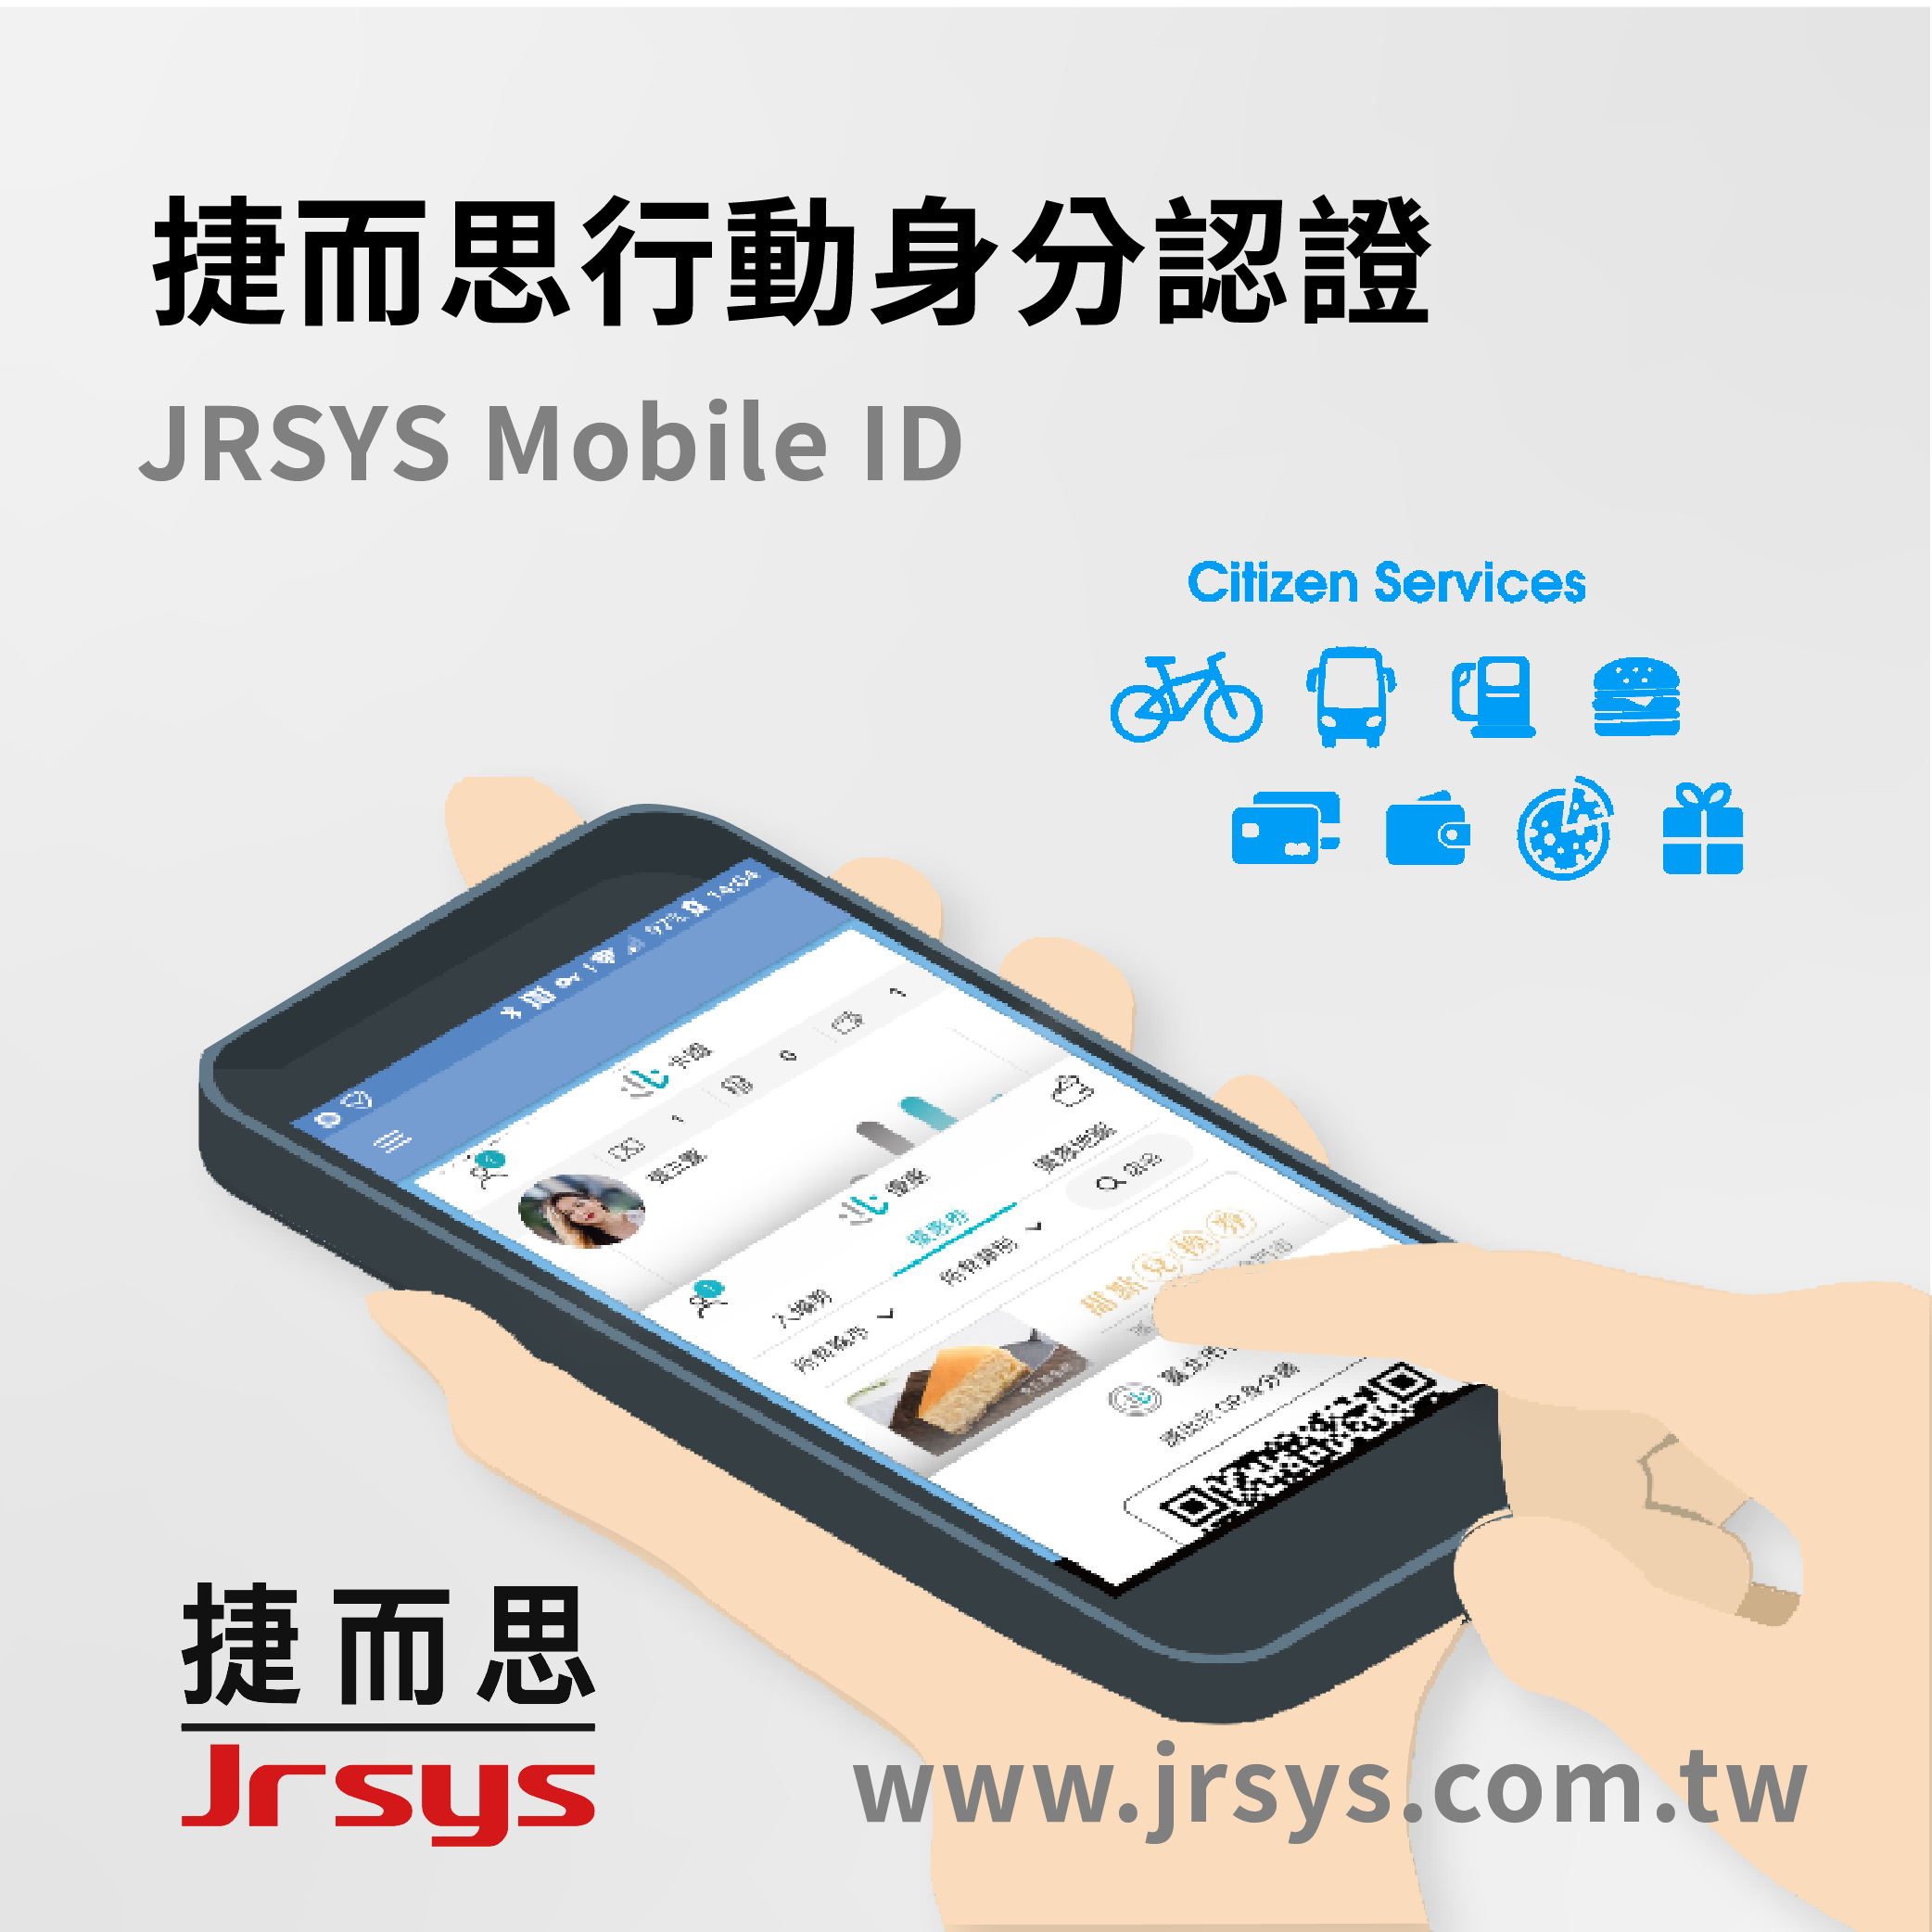 JRSYS Mobile ID